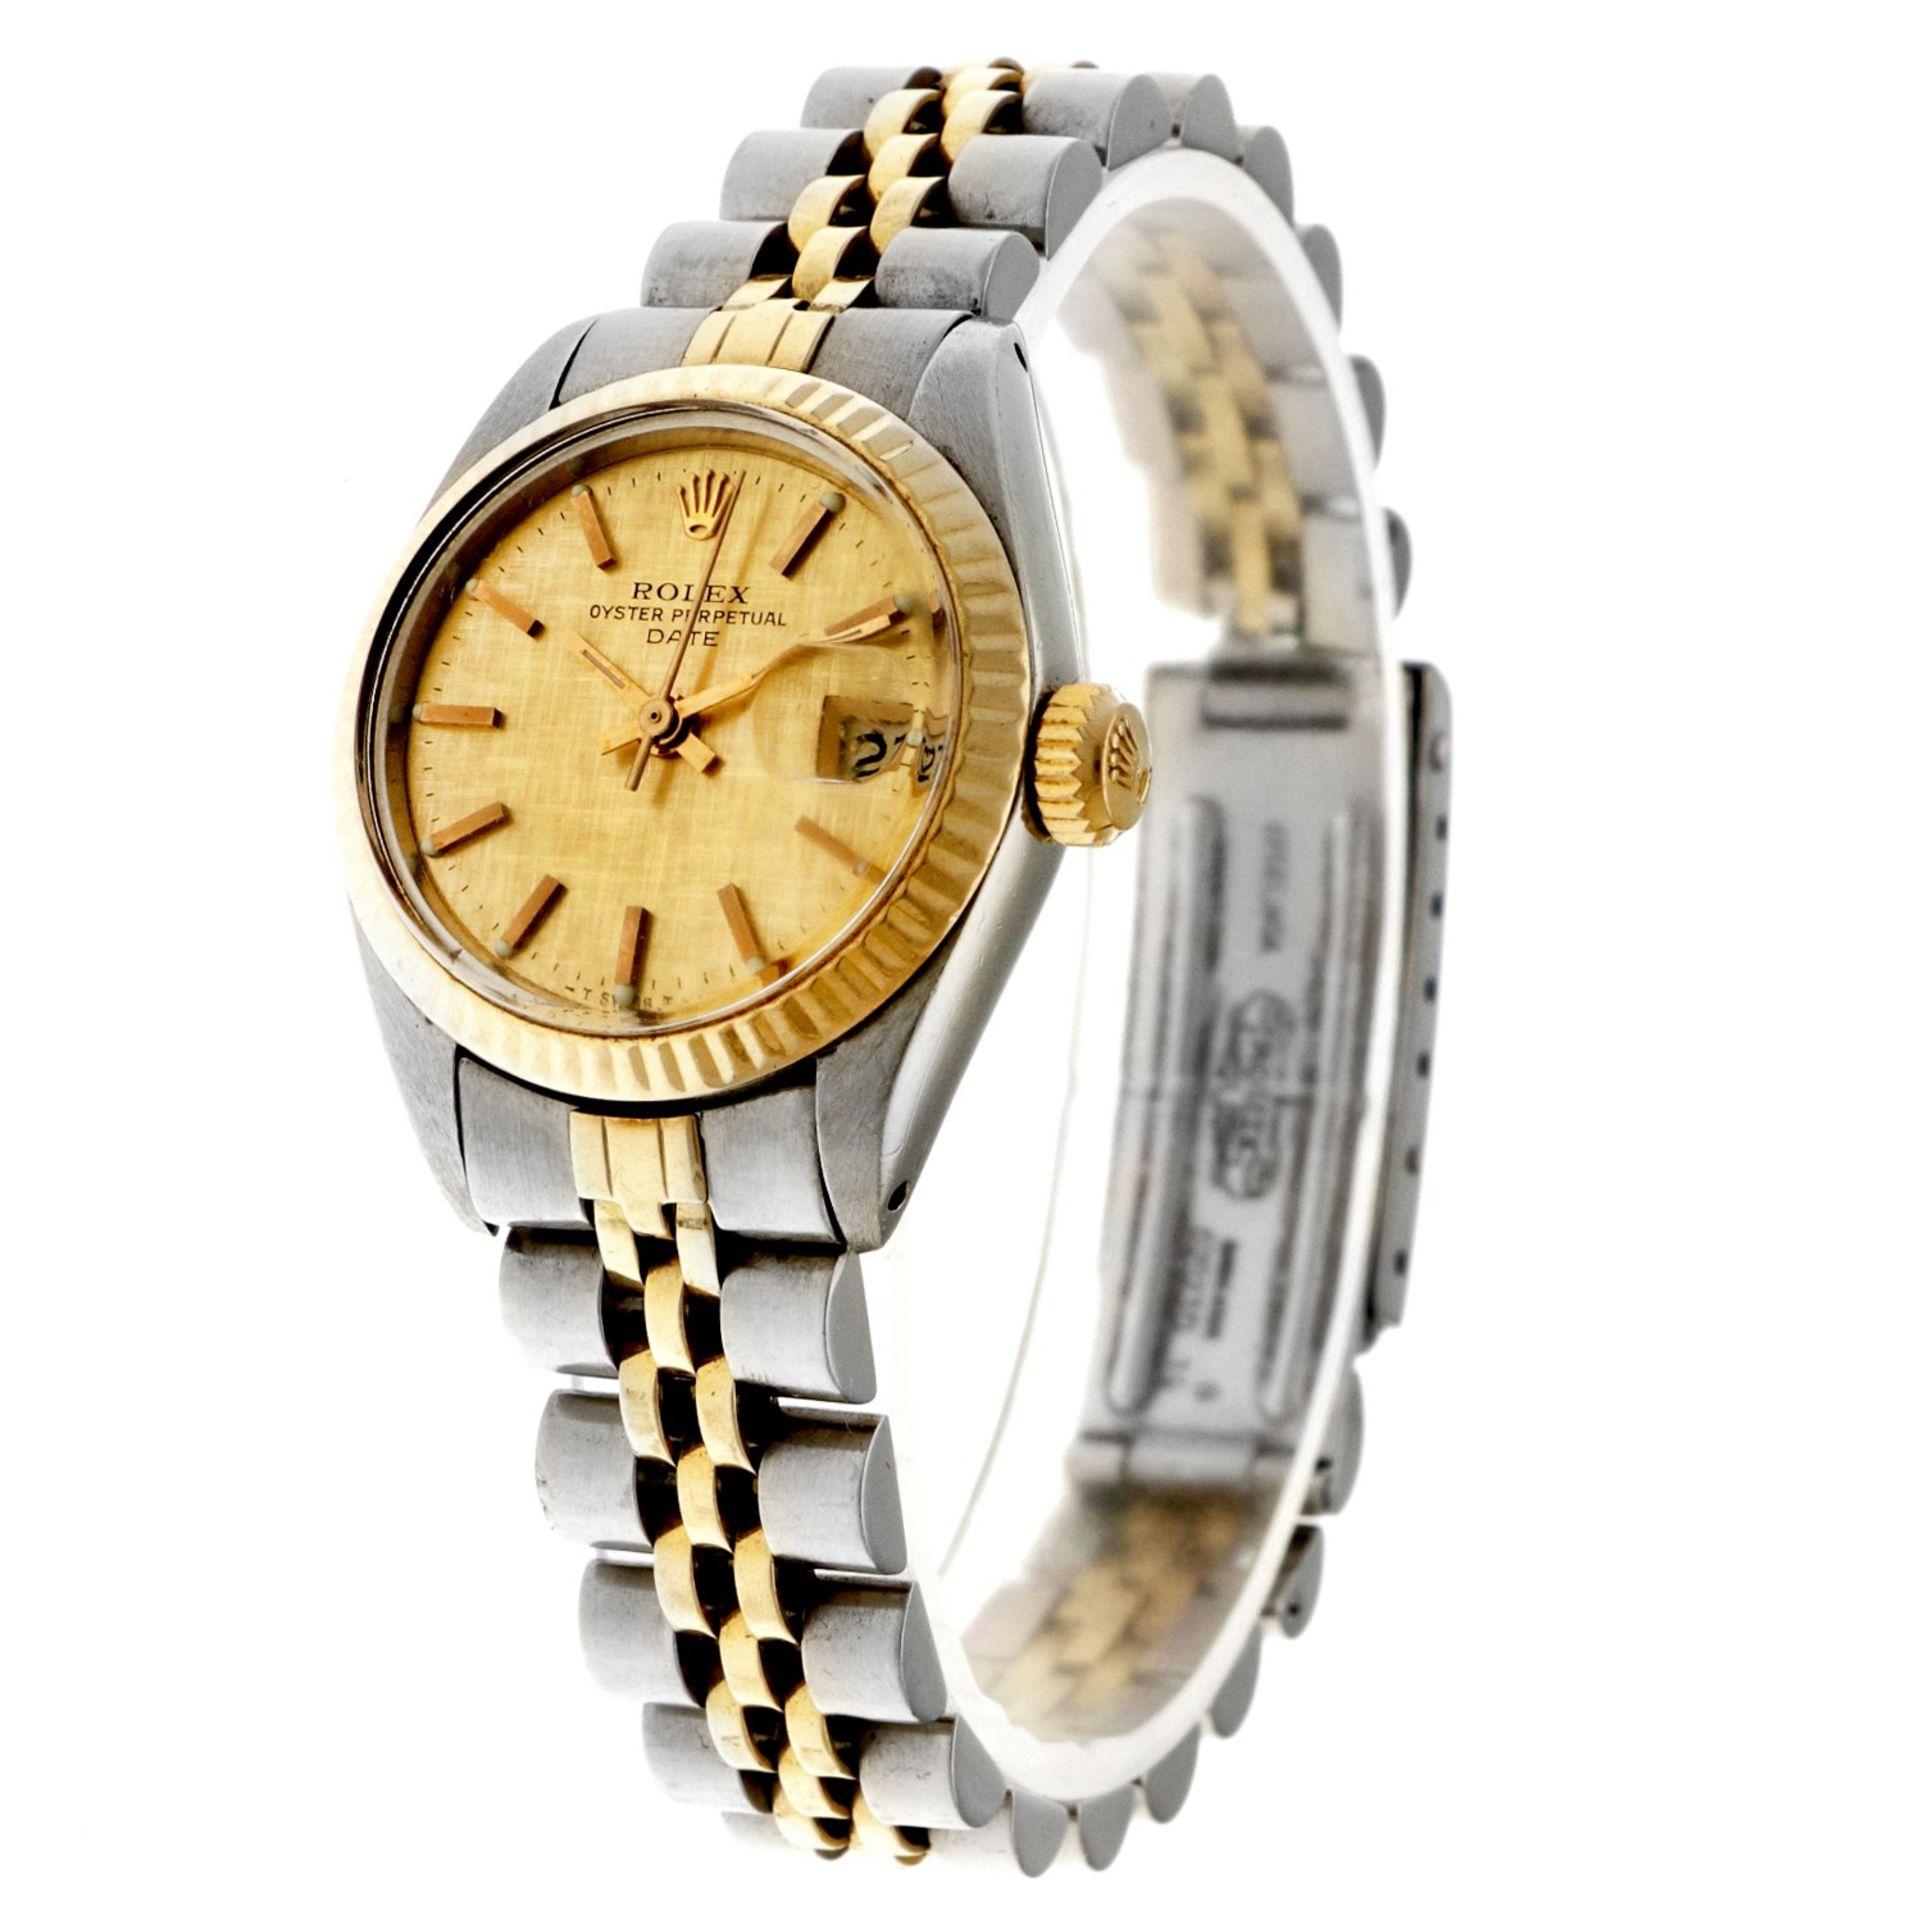 No Reserve - Rolex Date Lady 6917 "linen dial" - Ladies watch - approx. 1981. - Image 2 of 5